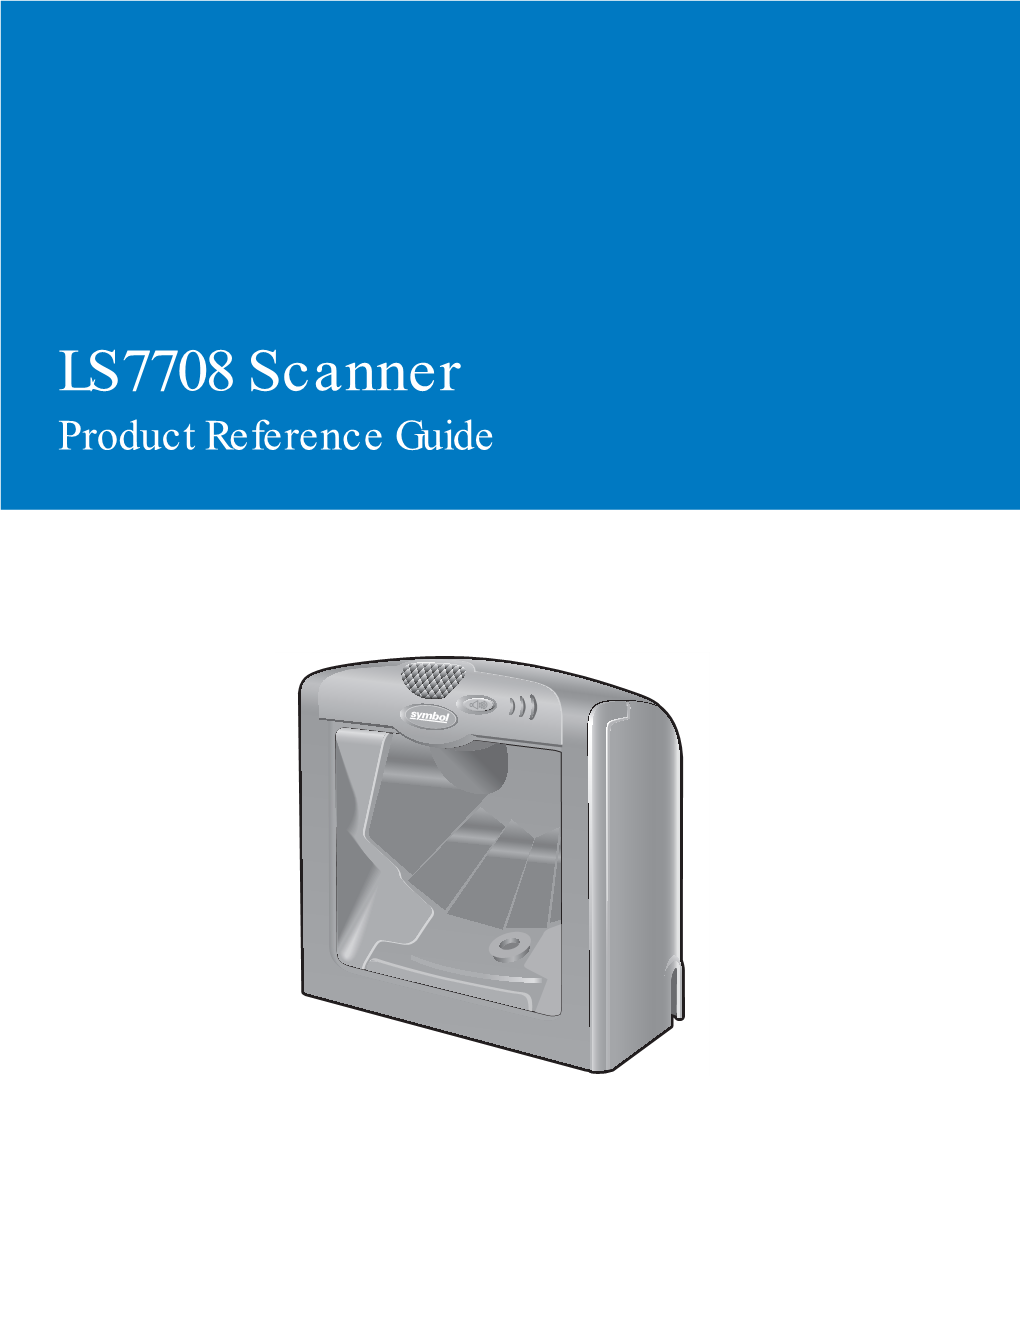 LS7708 Scanner Product Reference Guide